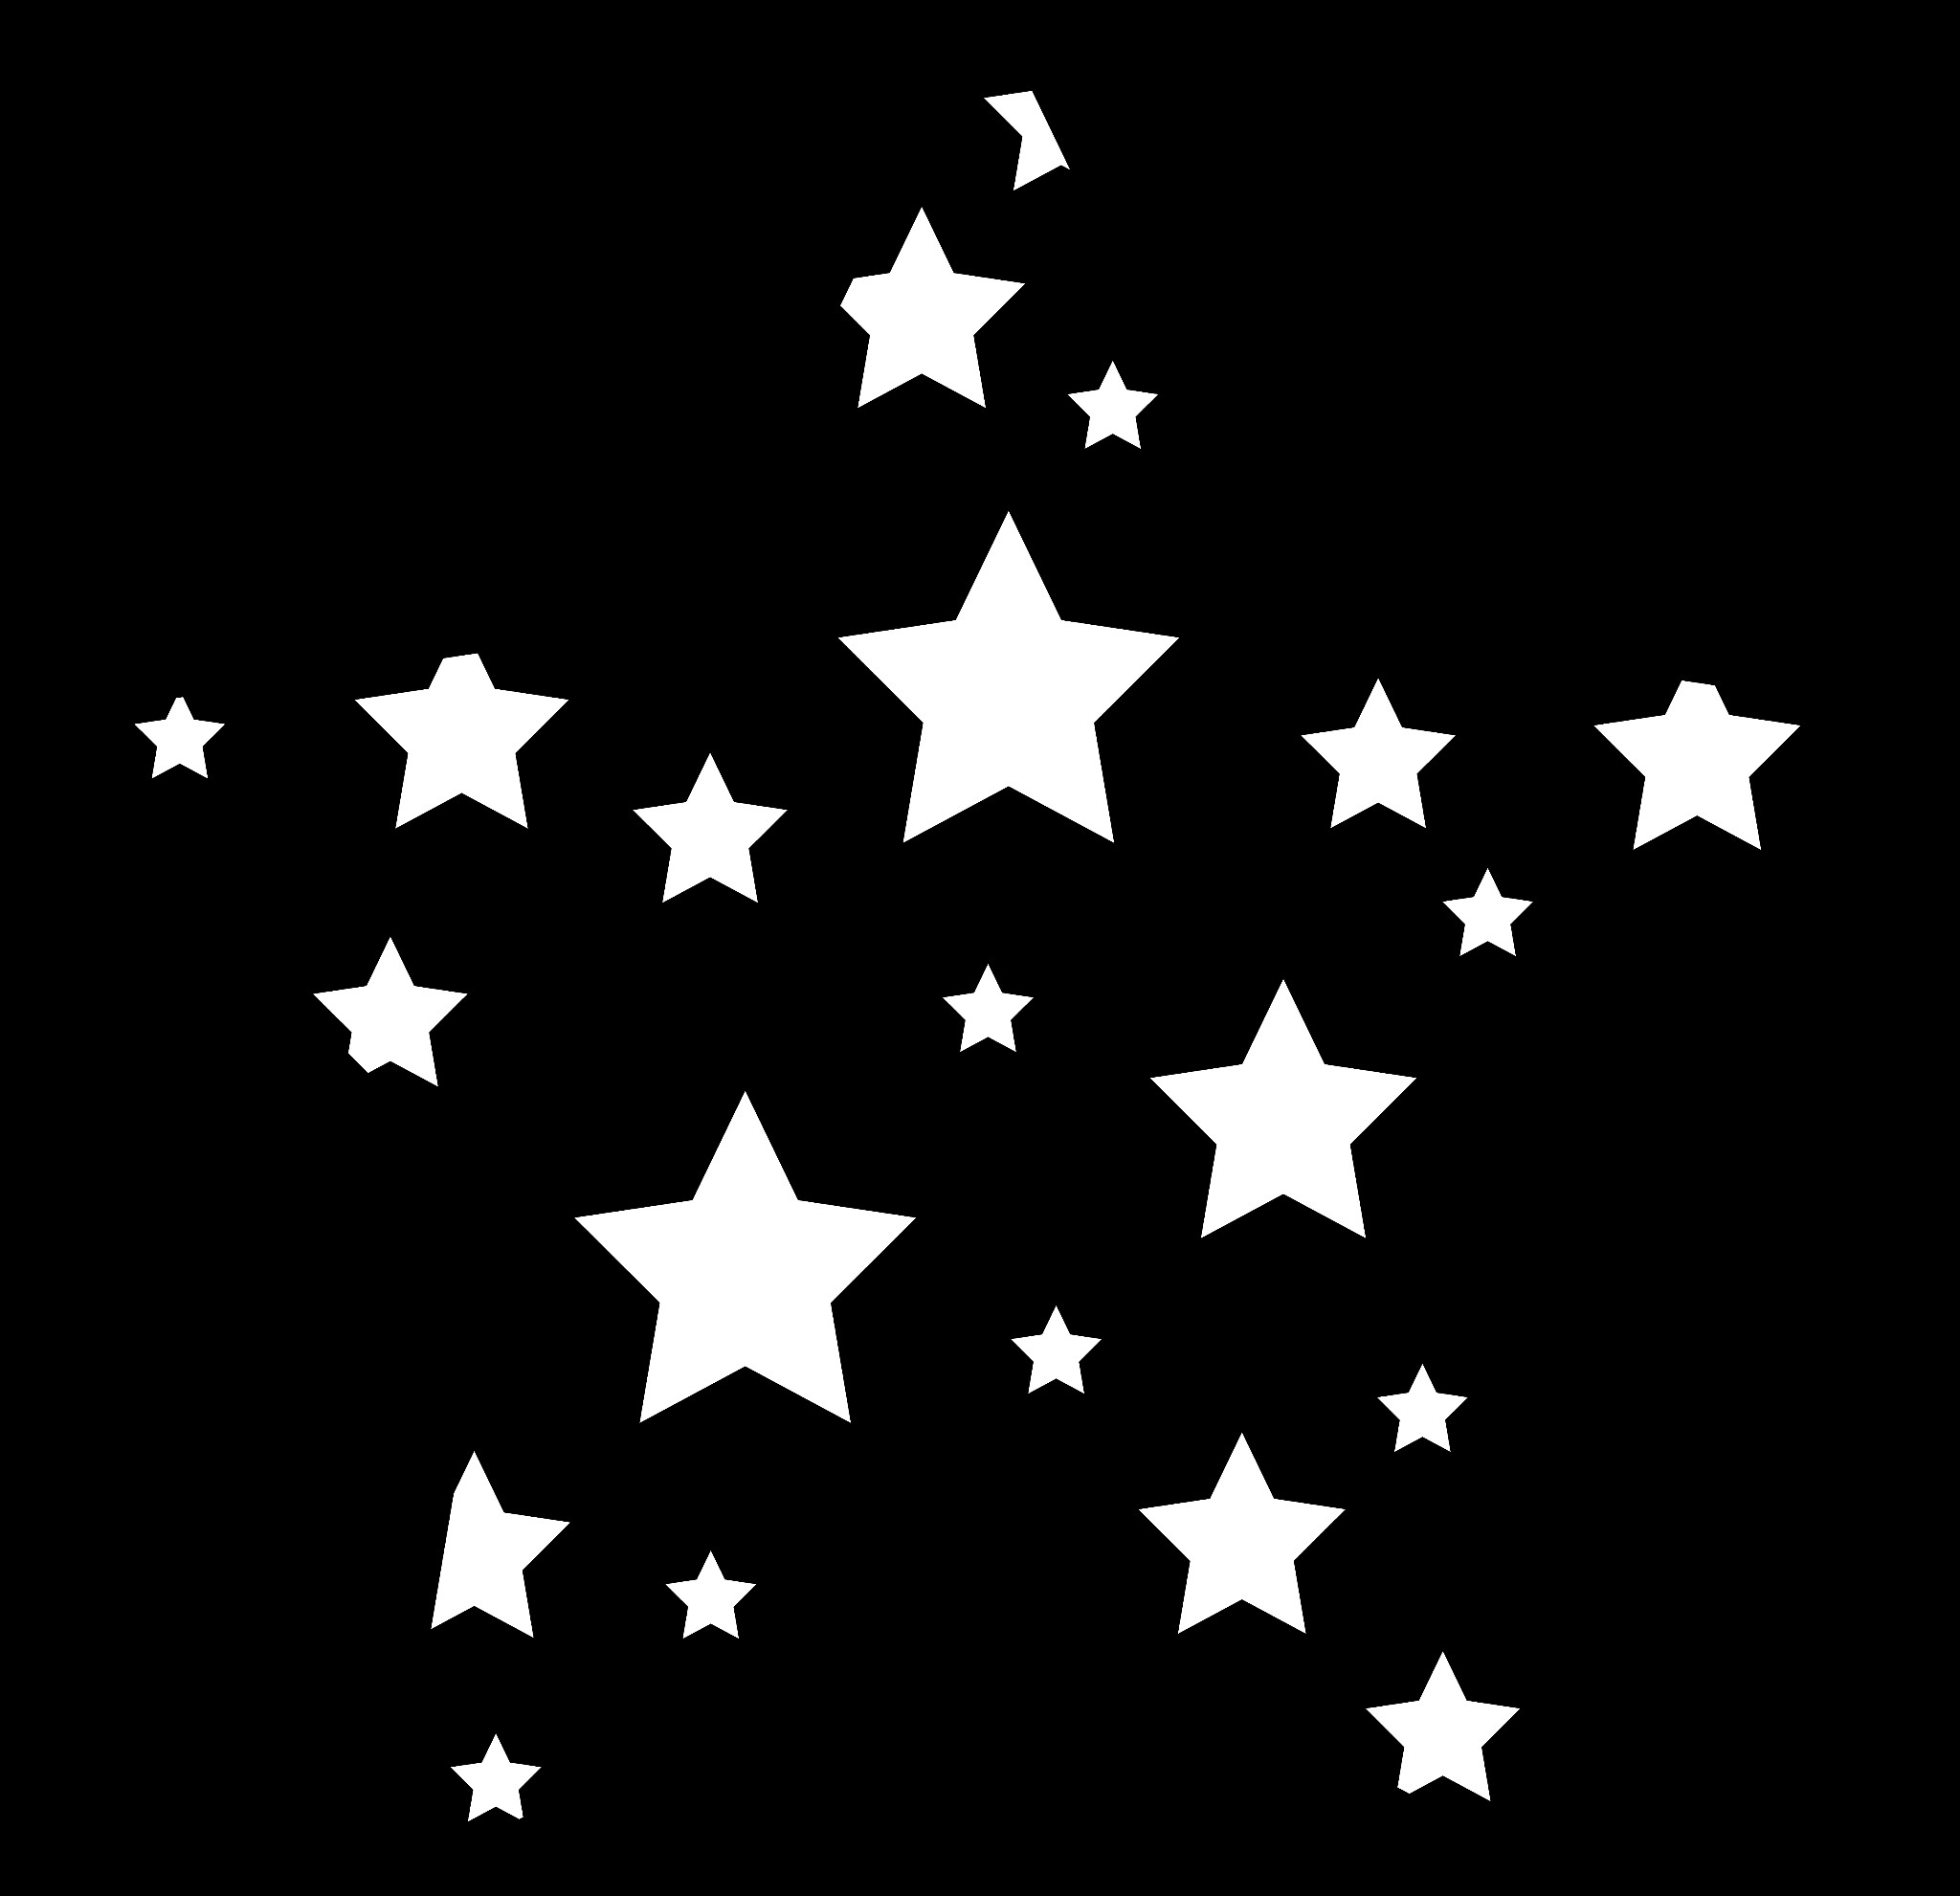 Star  black and white shooting star clipart black and white page 4 pics about space 2